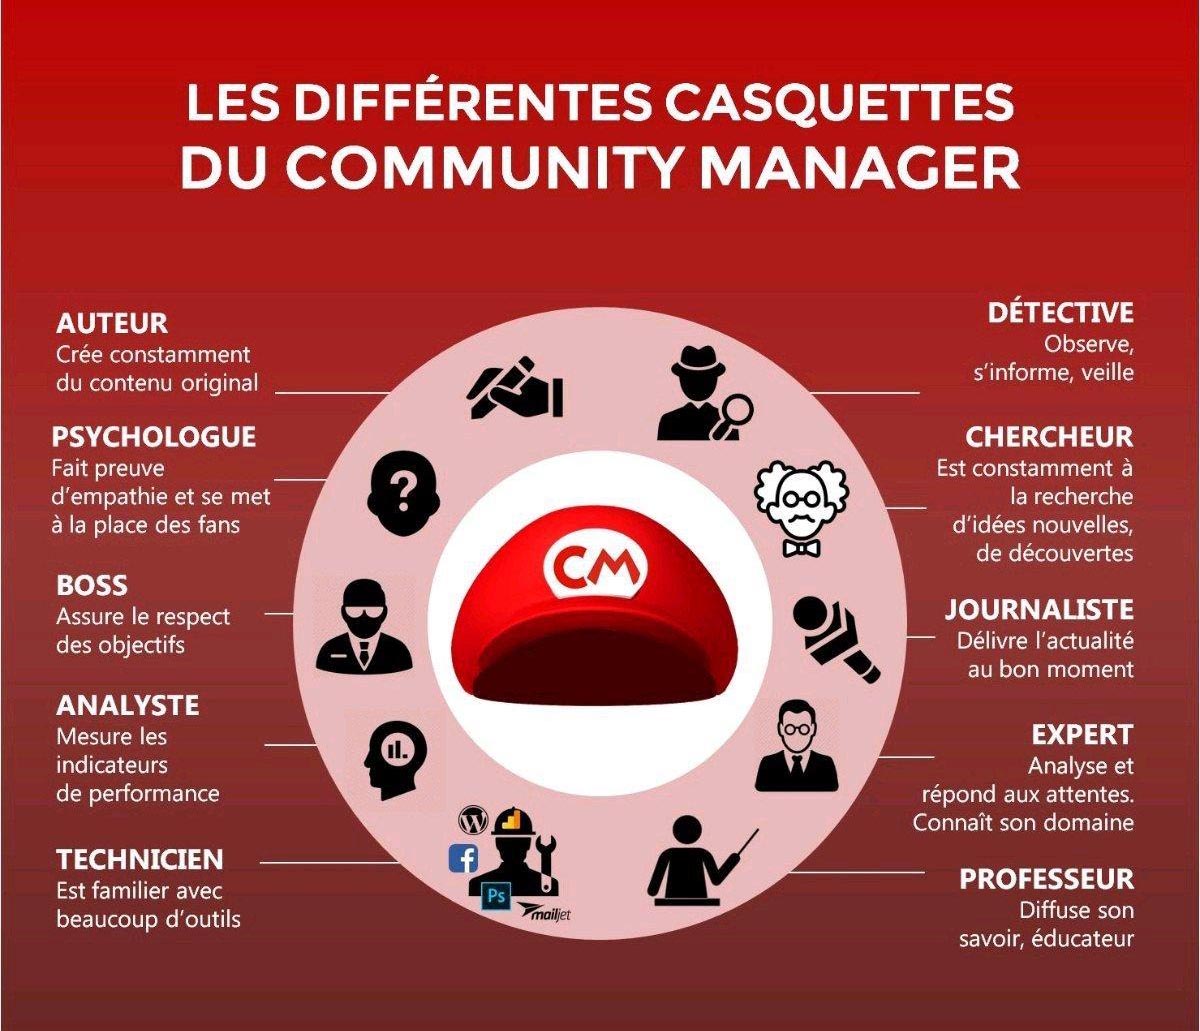 competence-communty-manager-www.culture-digitale.net_  Stratégie digitale culturelle competence communty manager www